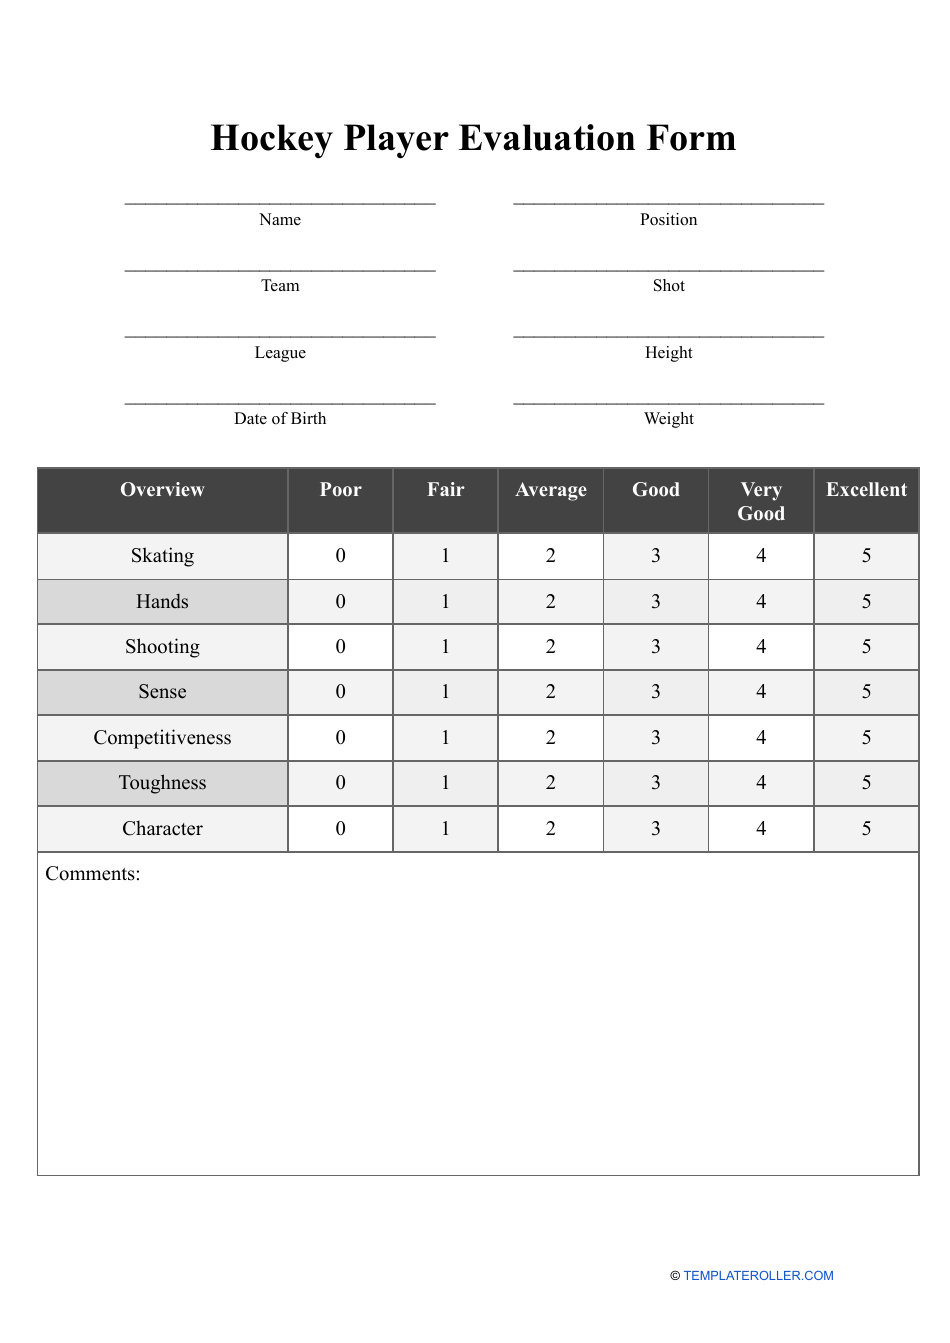 Hockey Player Evaluation Form, Page 1